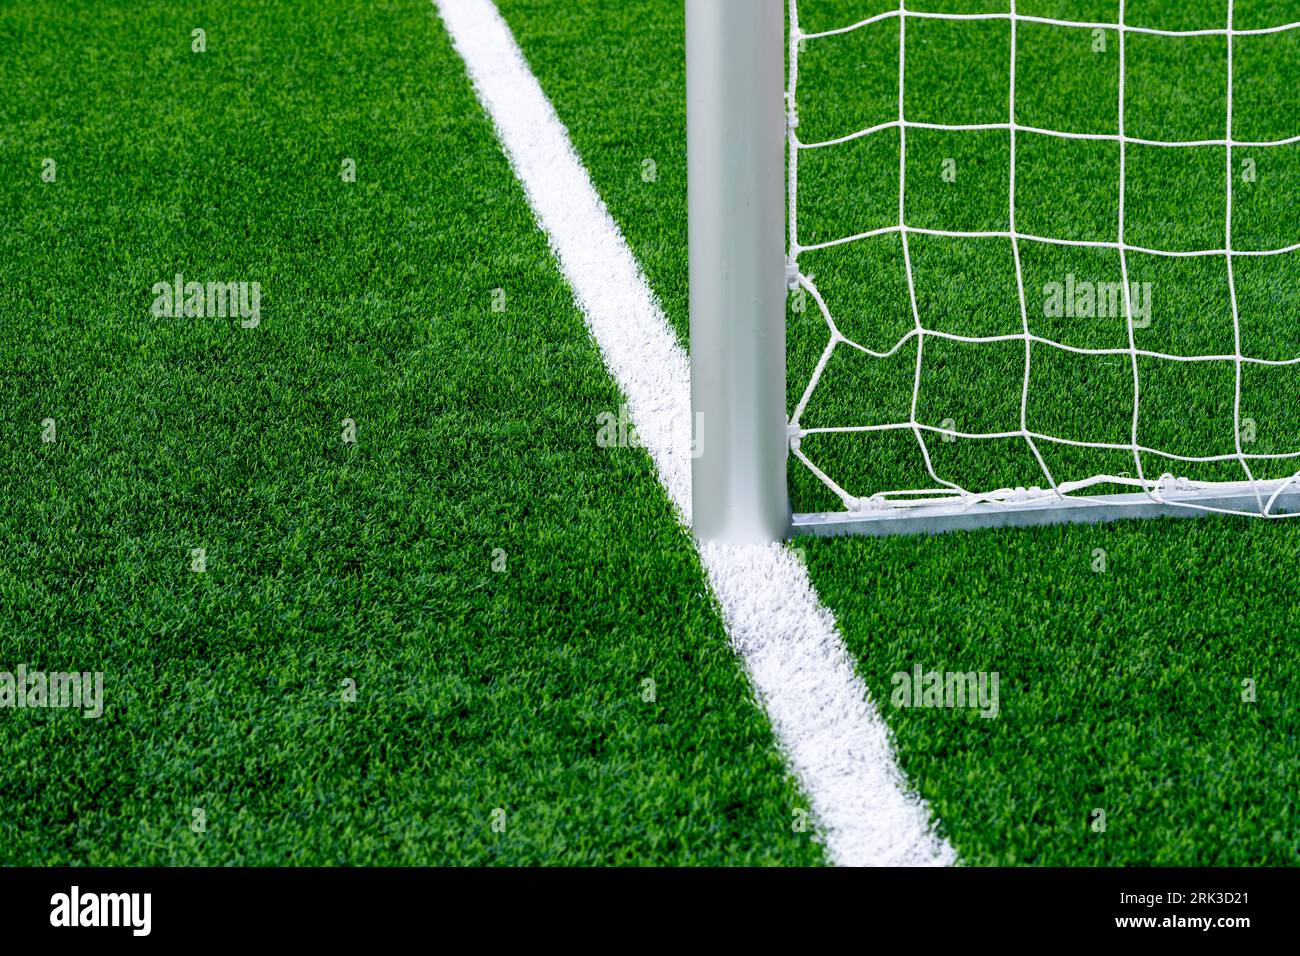 Hockey field, soccer, american football, lacrosse gate detail background over green grass. Horizontal sport poster, greeting cards, headers, website Stock Photo